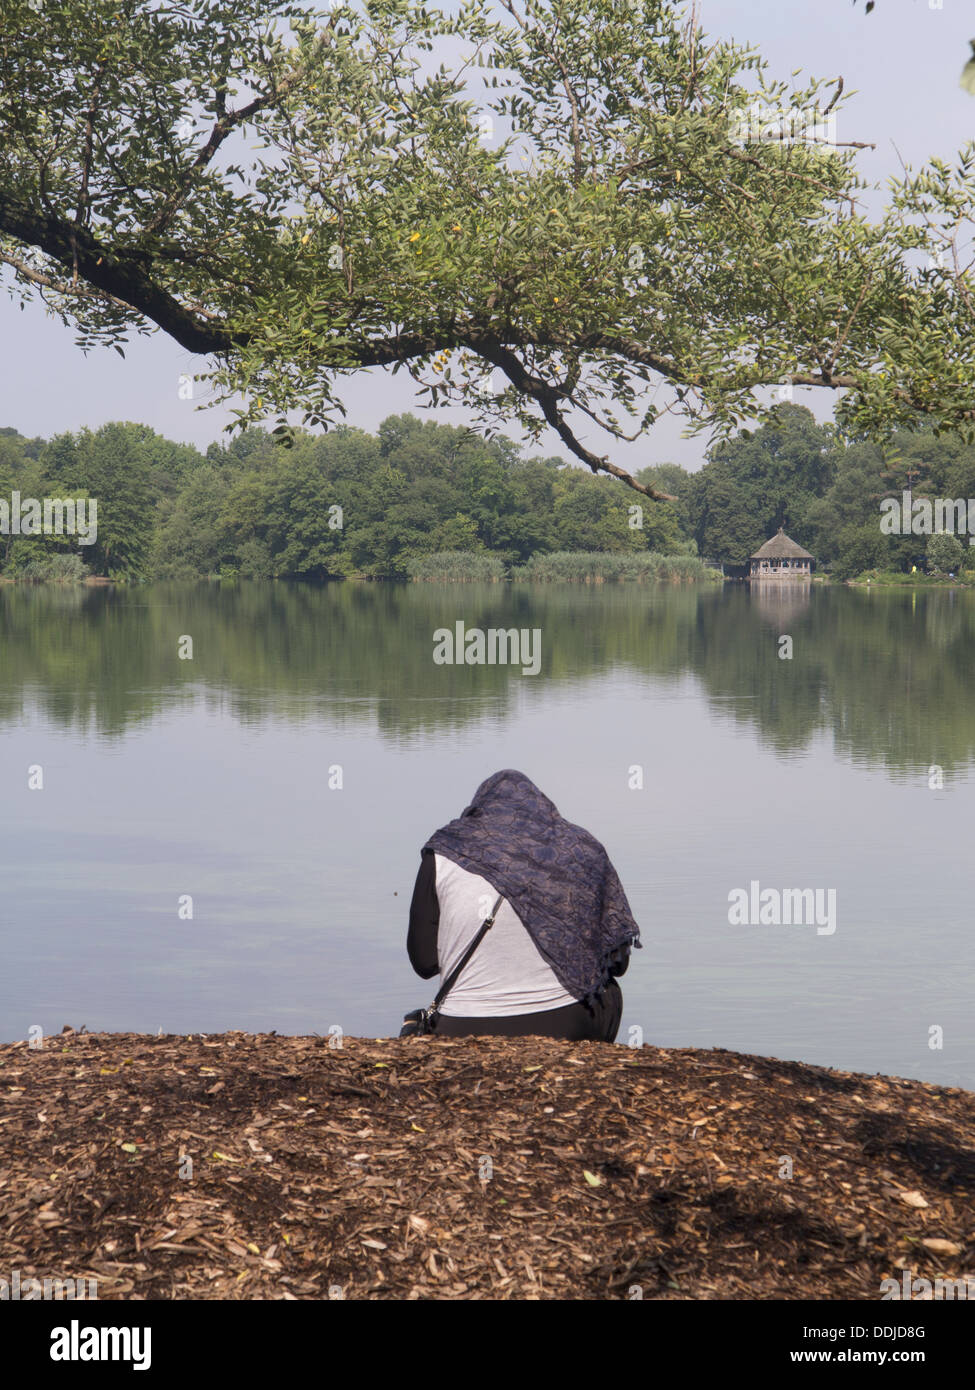 Muslim woman sitting along the lake in Prospect Park, Brooklyn, NY. Stock Photo